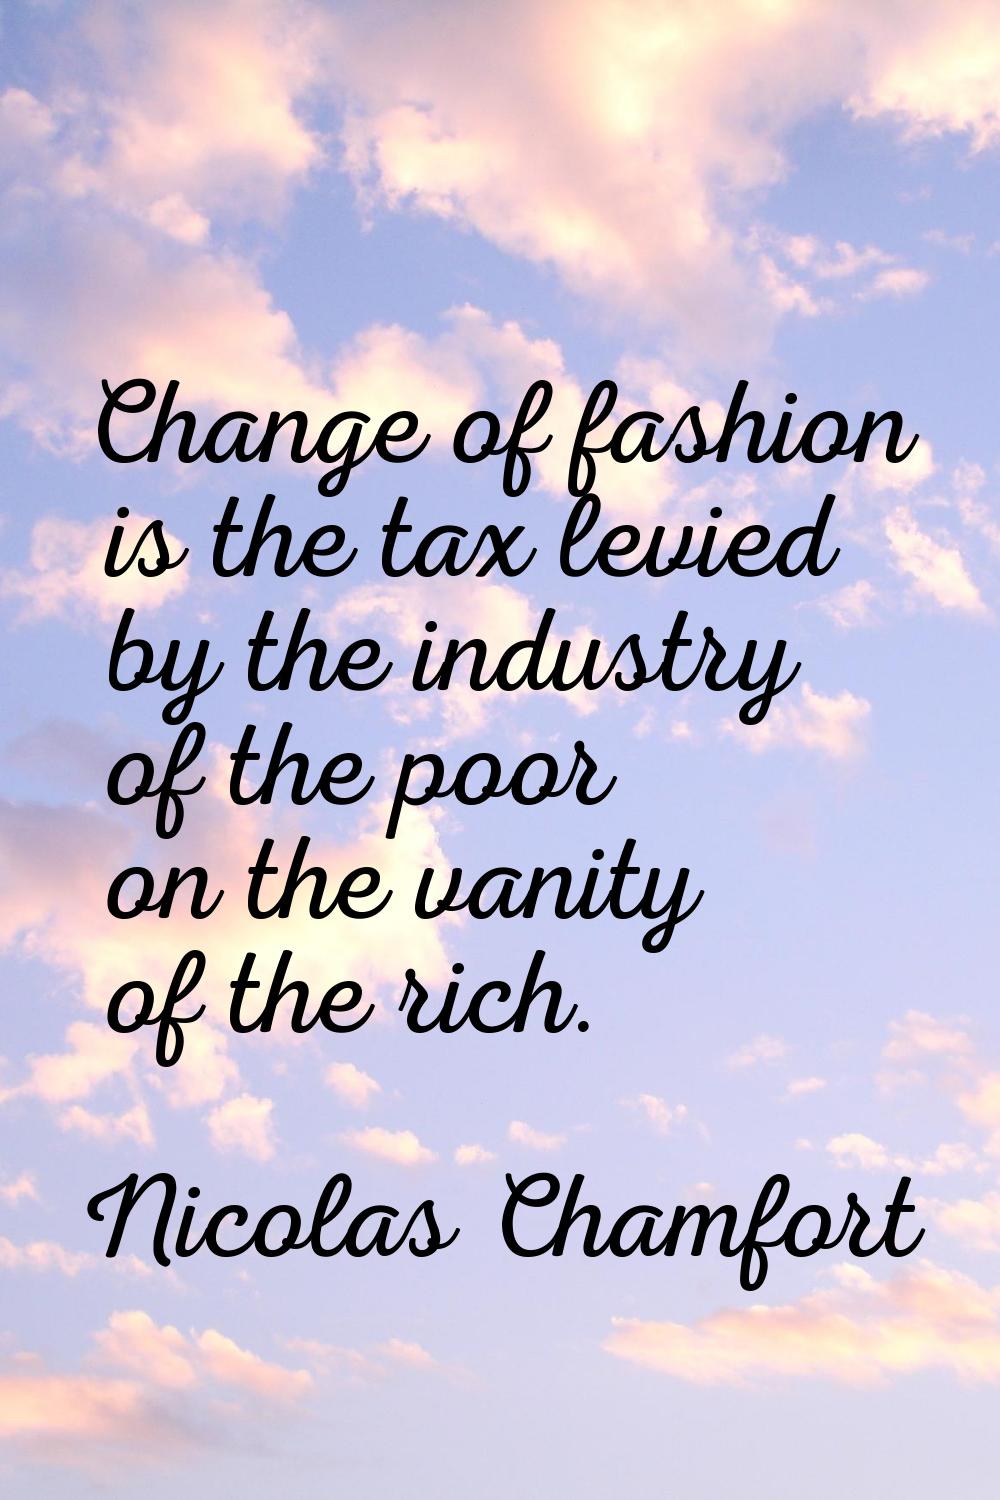 Change of fashion is the tax levied by the industry of the poor on the vanity of the rich.